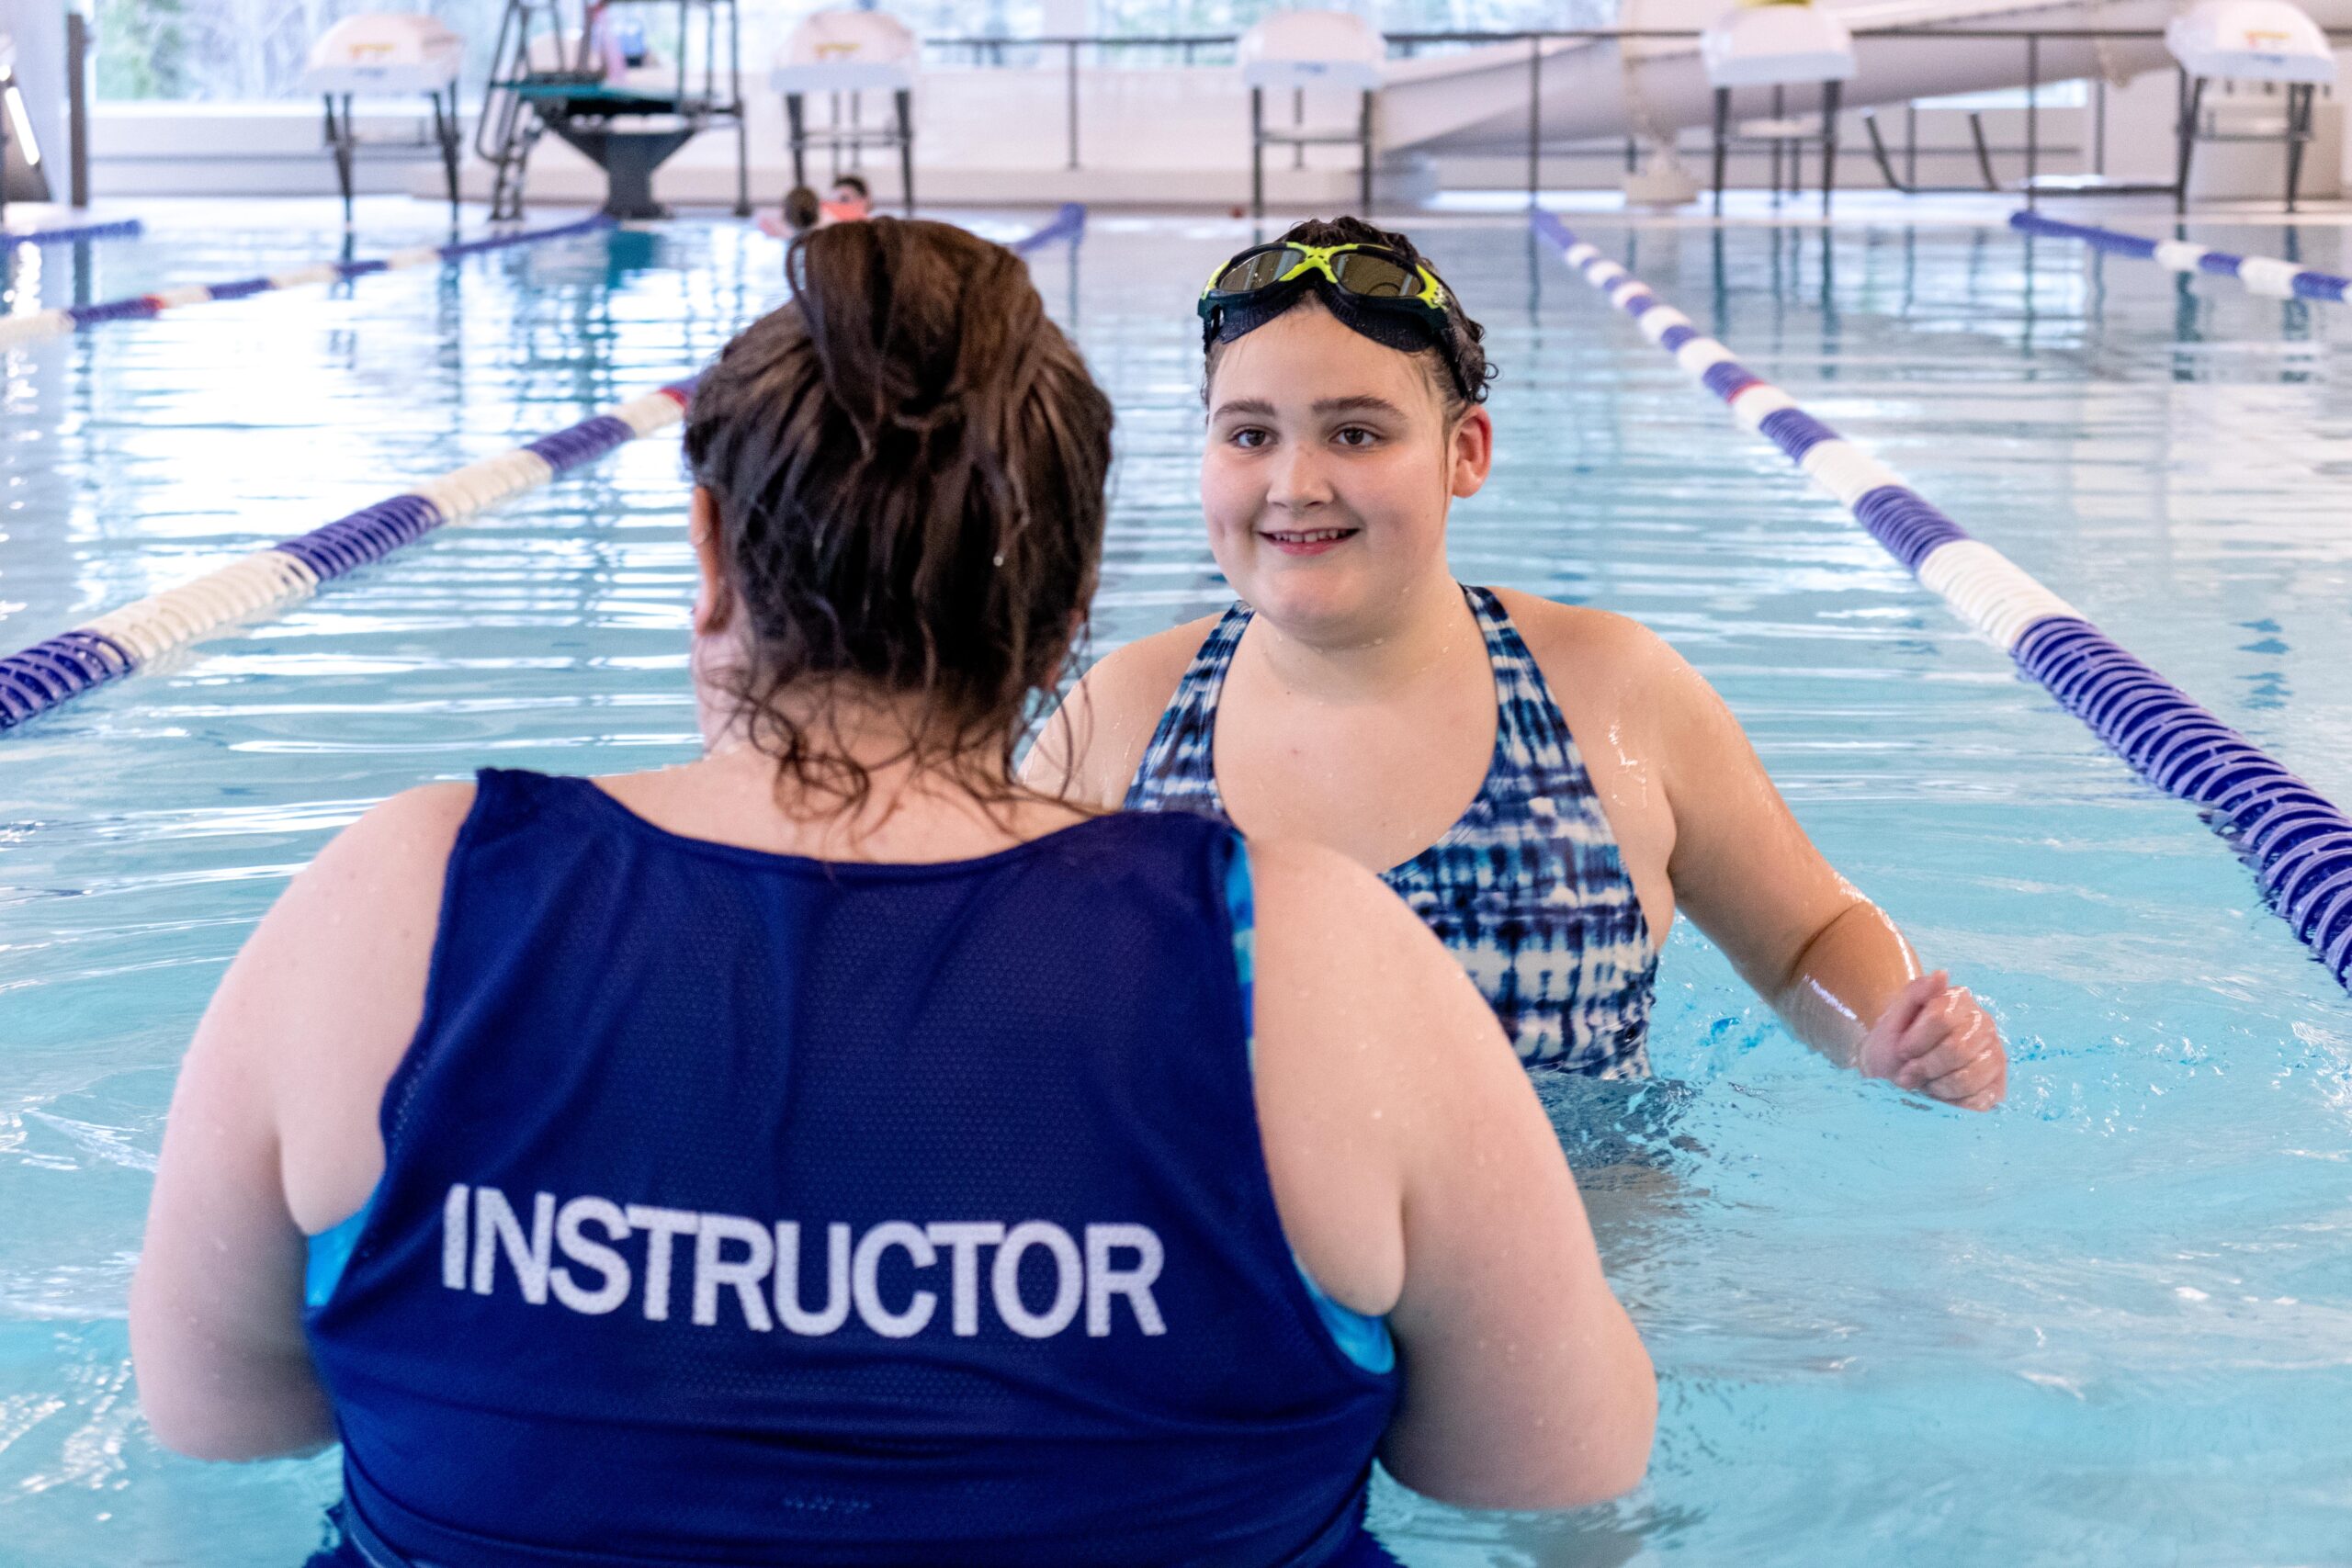 An instructor leads a student in an inclusion lesson